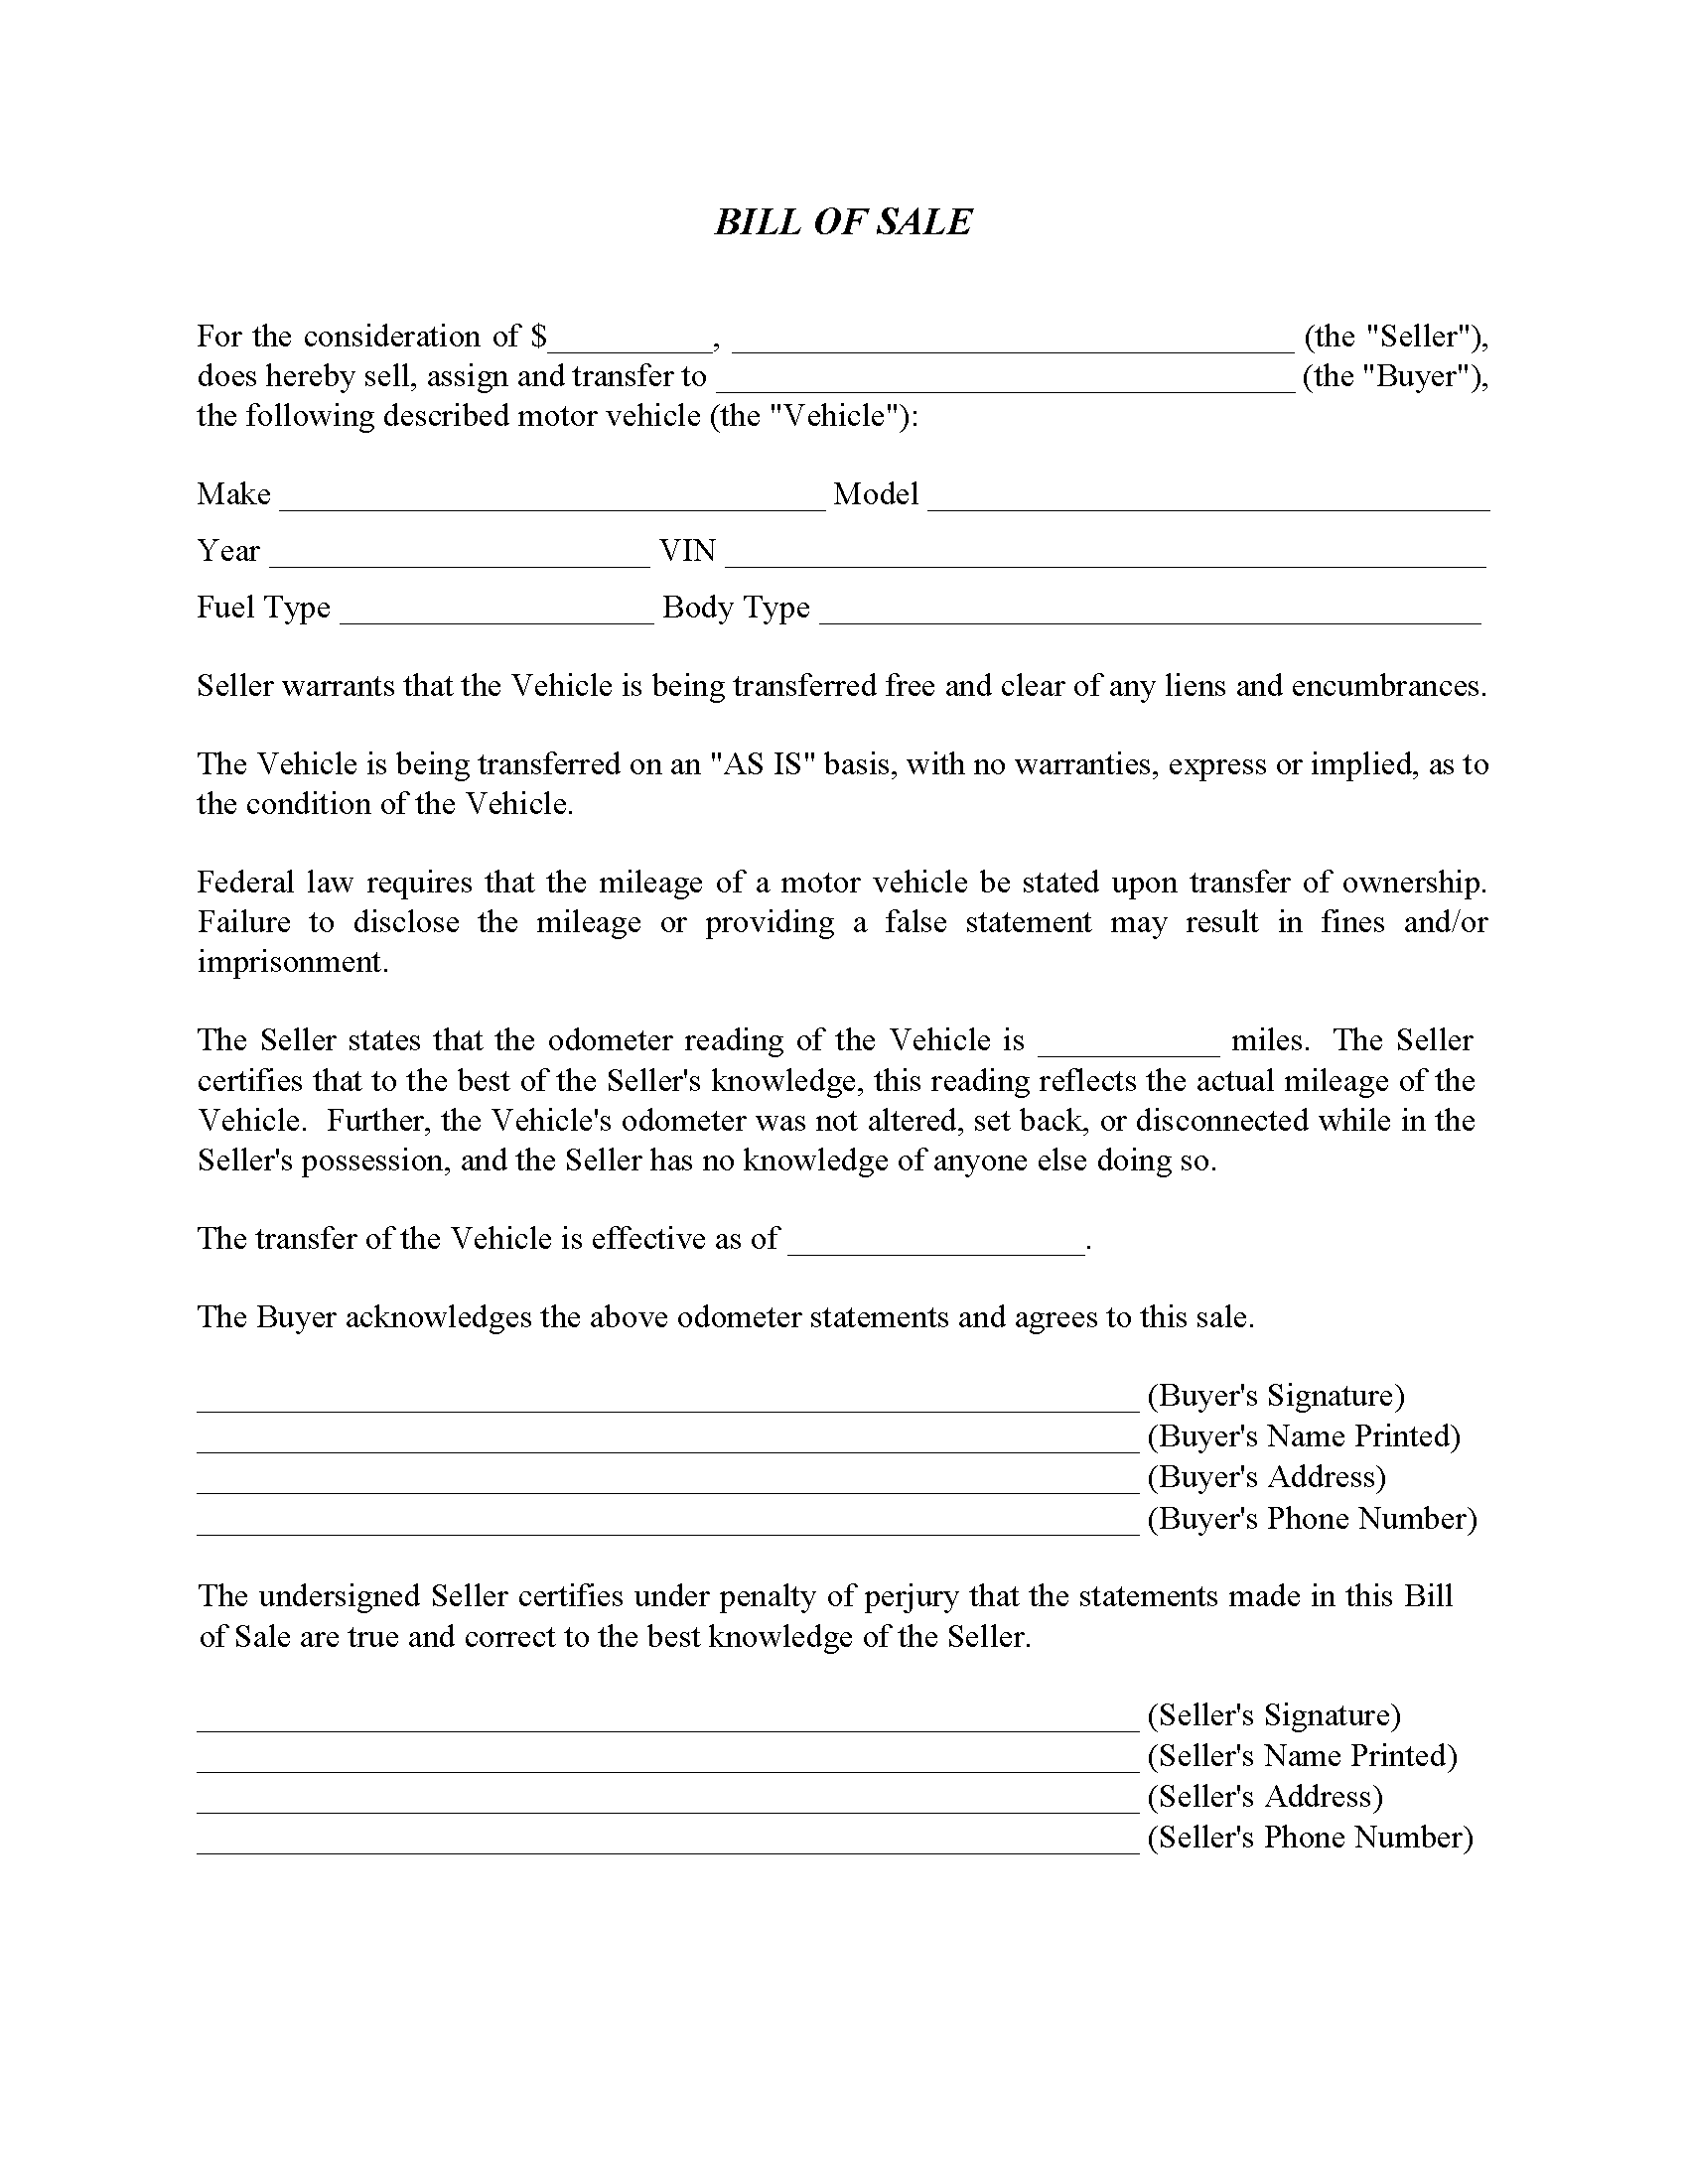 Michigan Motor Vehicle Bill of Sale Form Free Printable Legal Forms